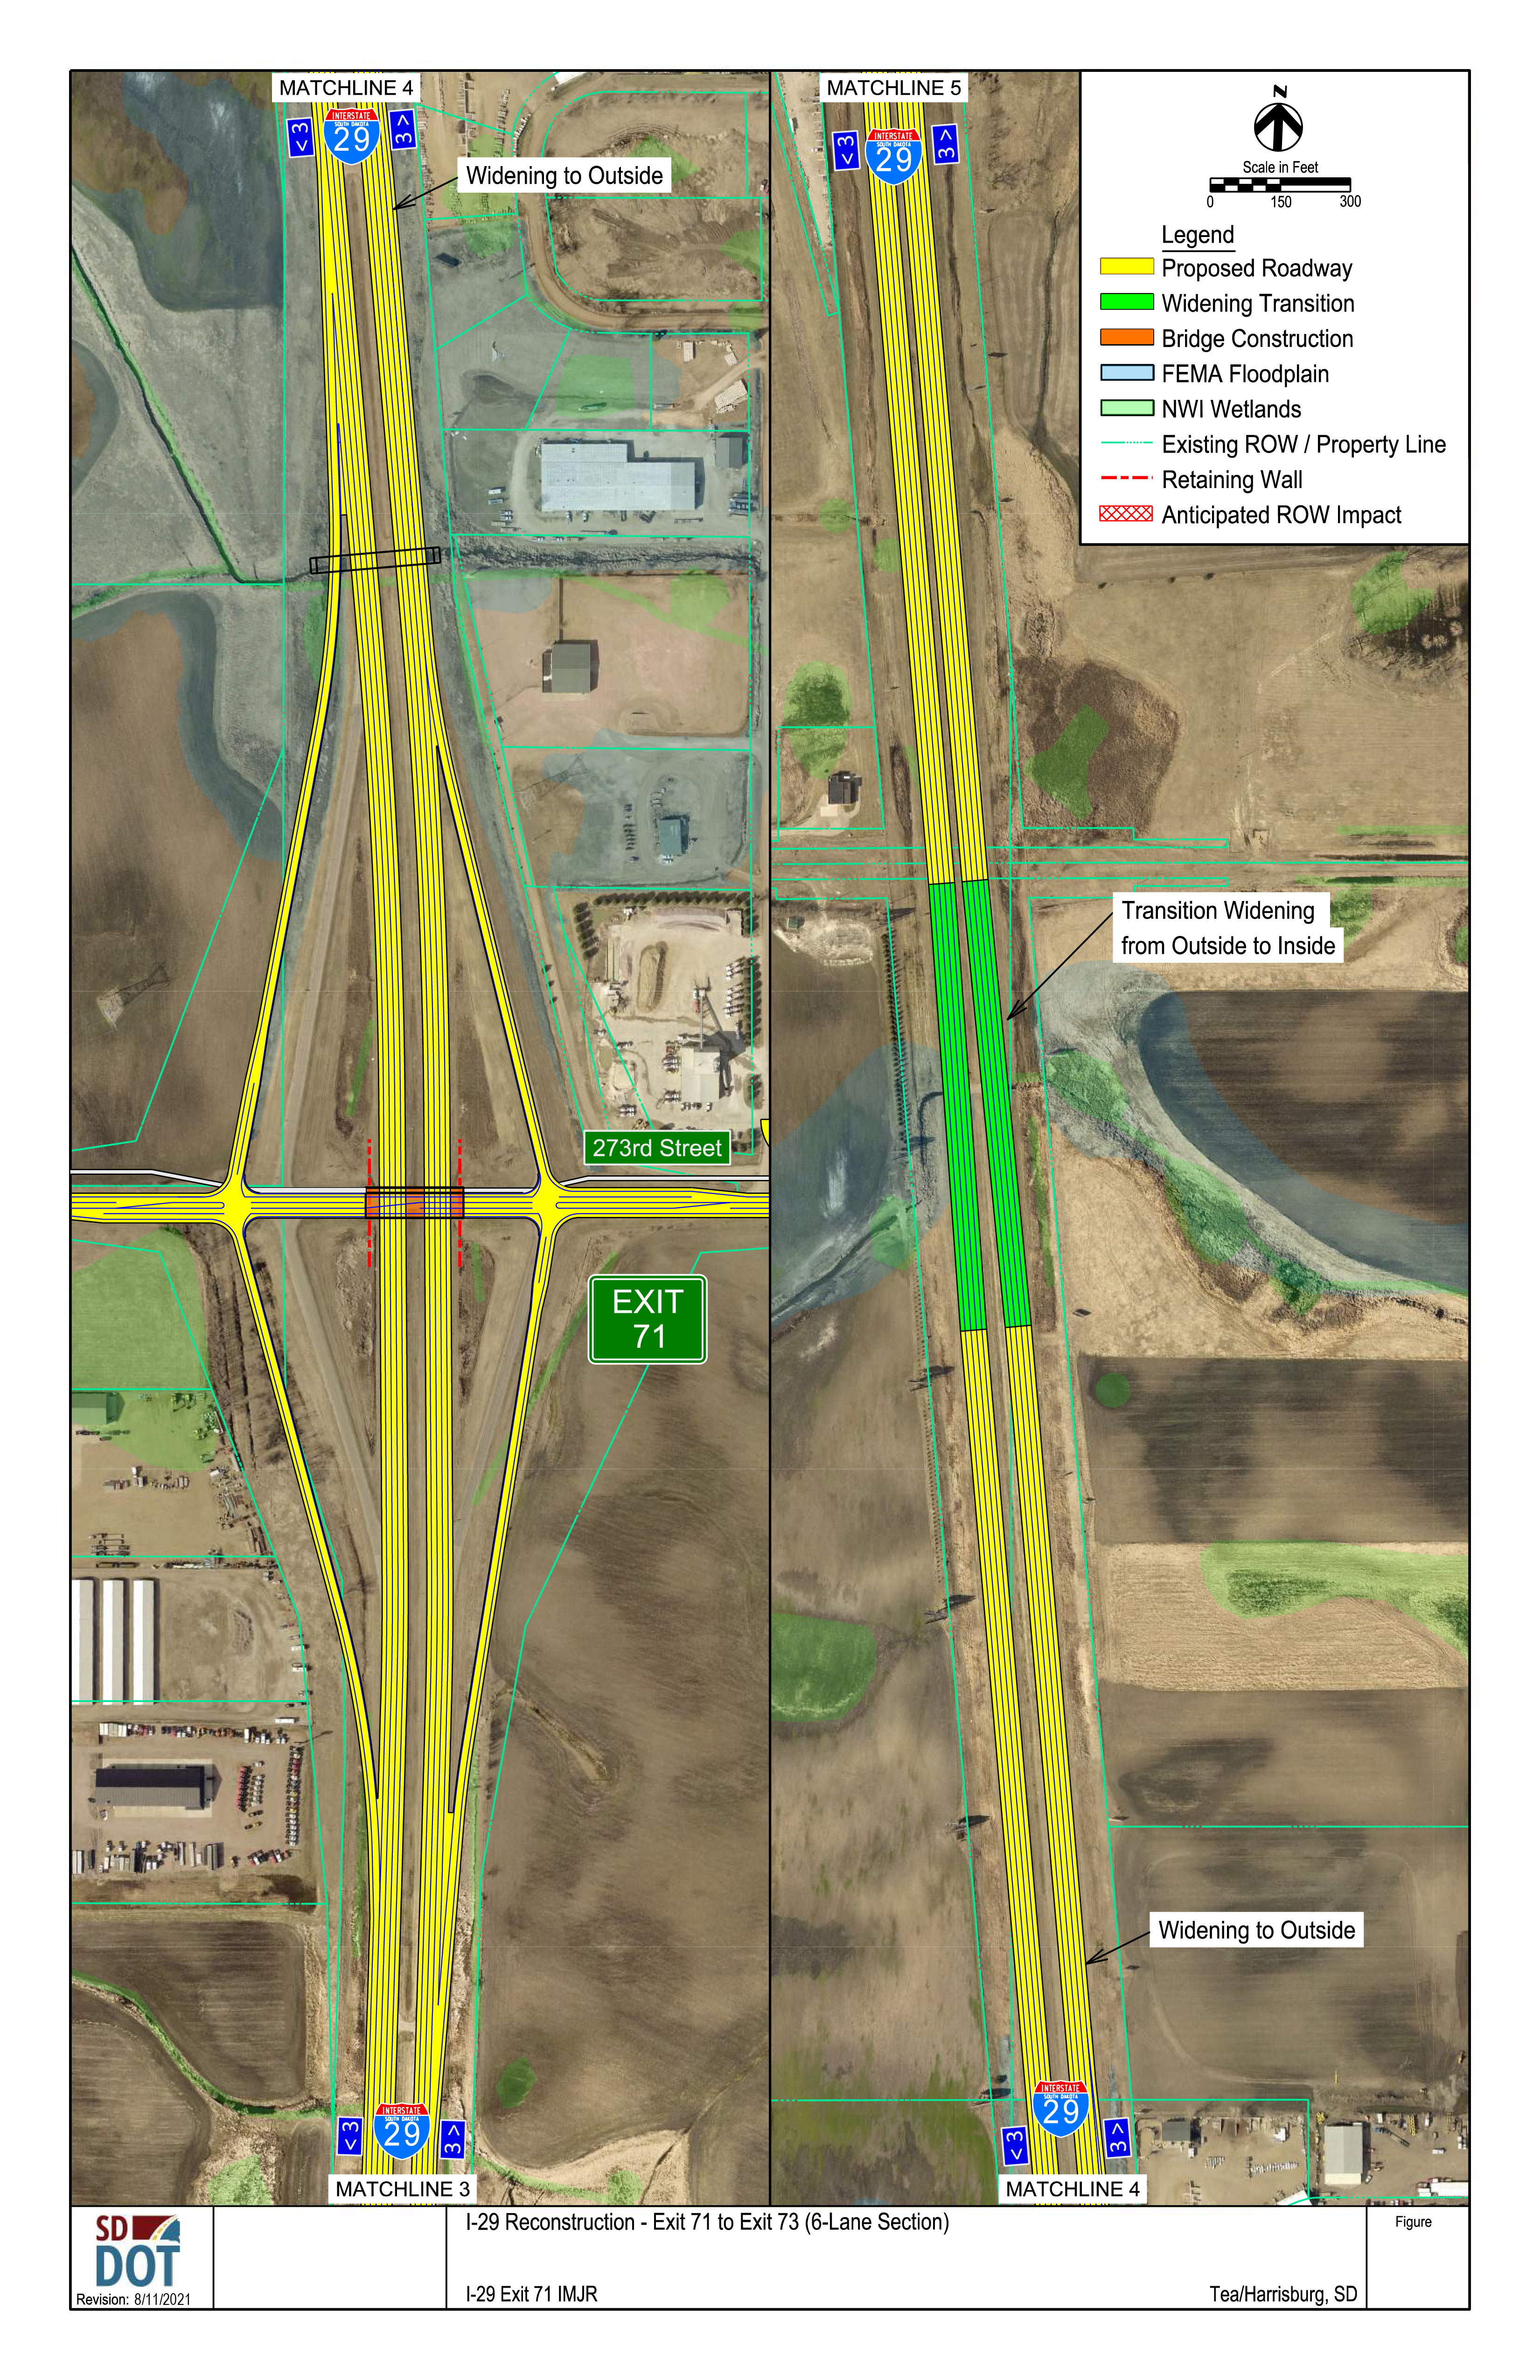 This image shows the conceptual layout of a 6-lane construction from exits 71 to 73. Details on the diagram include the proposed roadway, the widening transition, bridge construction, FEMA floodplain, NWI Wetlands, existing right of way and property lines, retaining walls and anticipated right of way impacts.